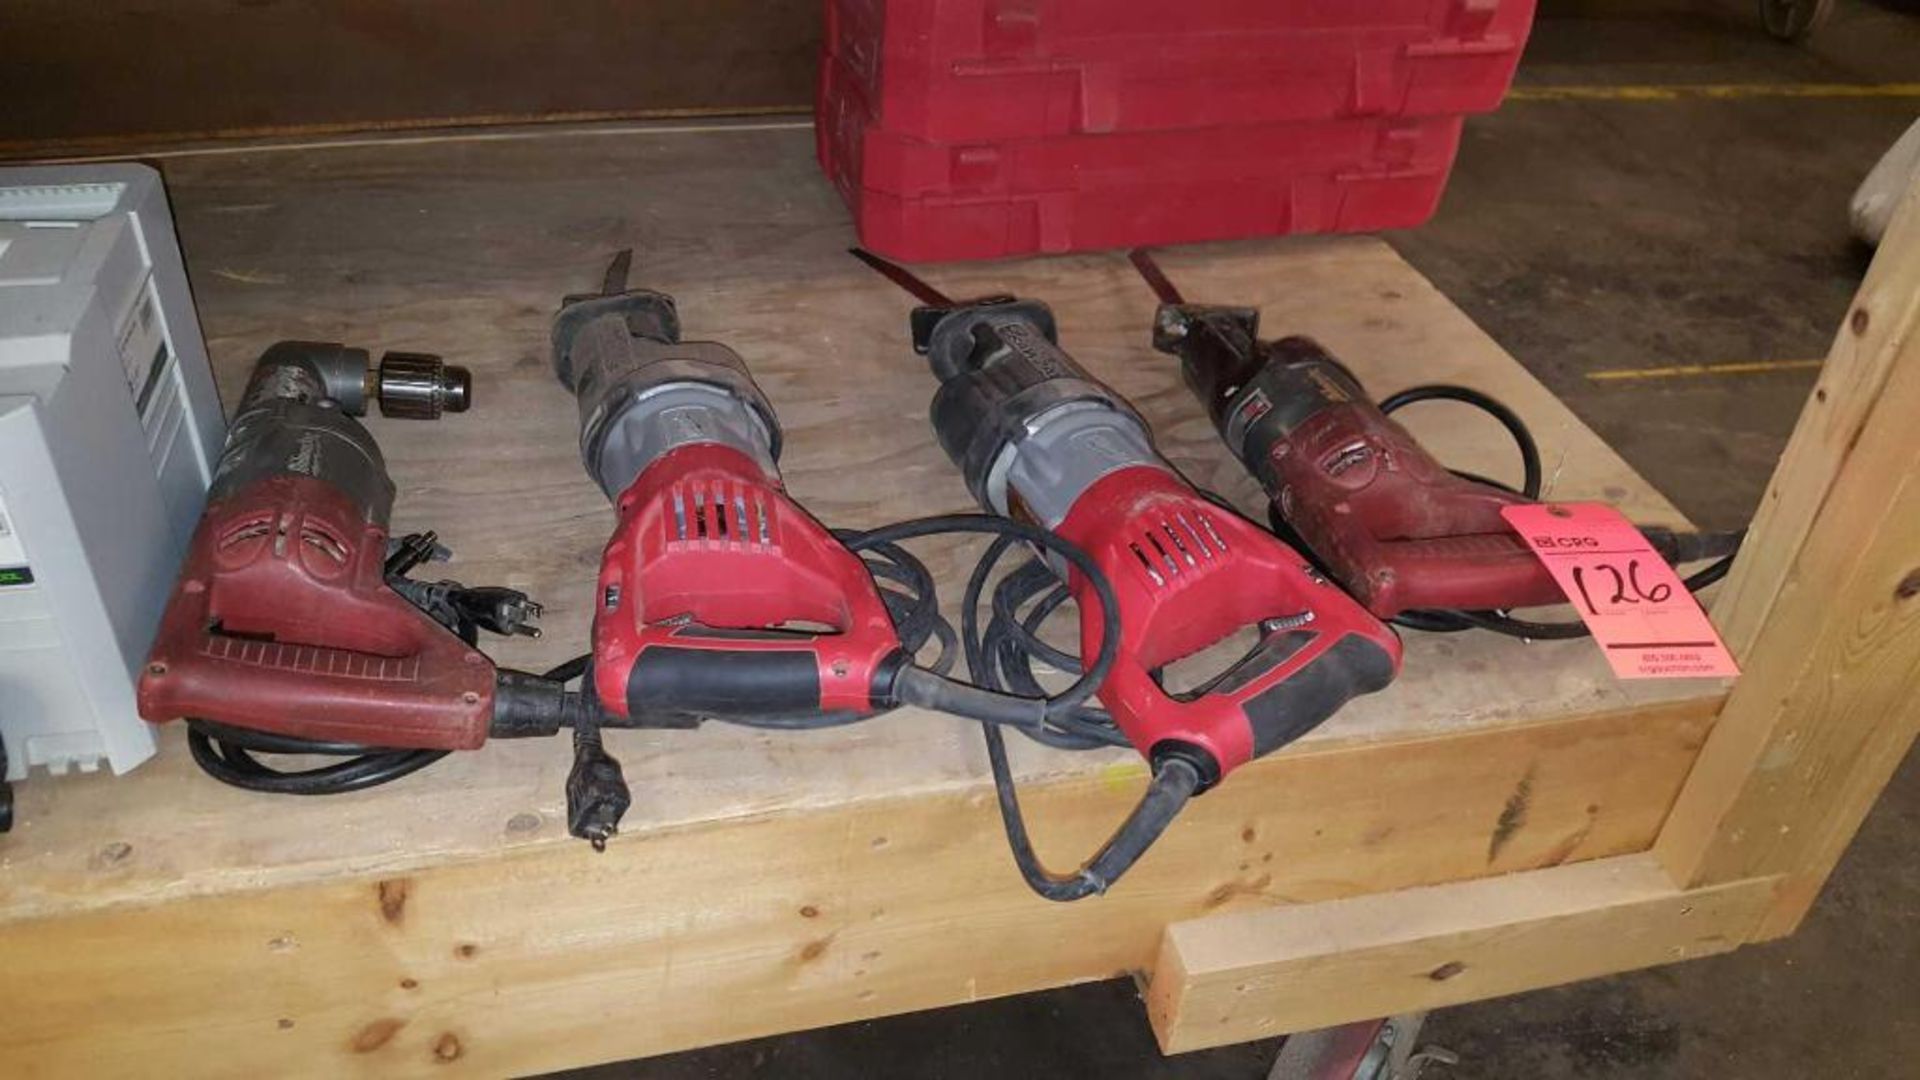 (3) Milwaukee reciprocating saws and (1) Milwaukee right angle drill, (2) cases